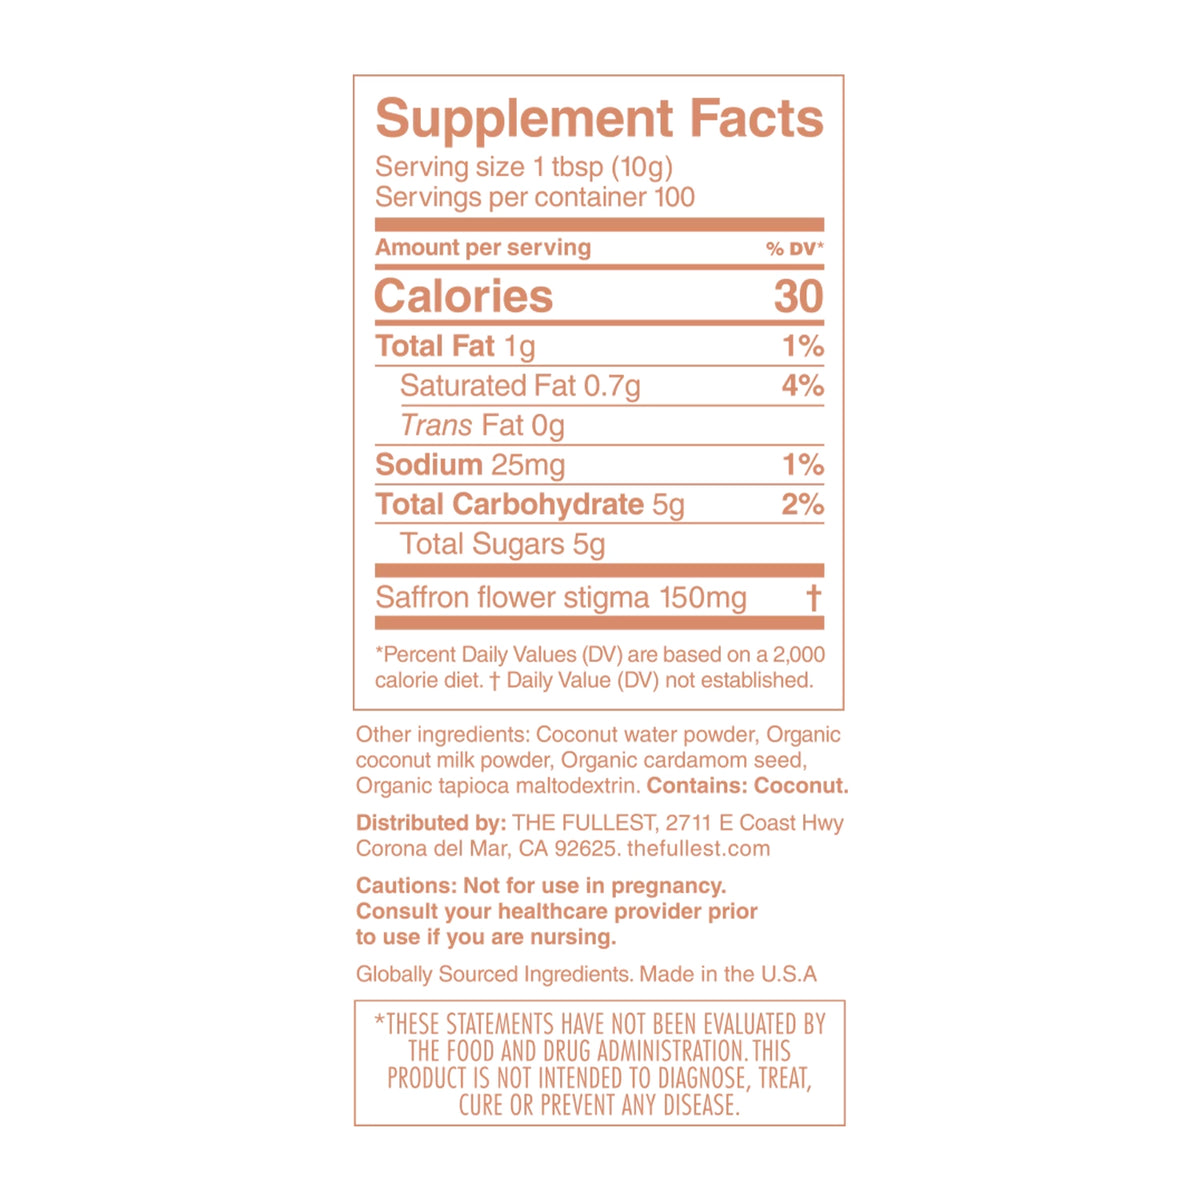 Nutritional label displaying serving size, calories, and ingredients for warm feelings saffron latte bulk bag by THE FULLEST,